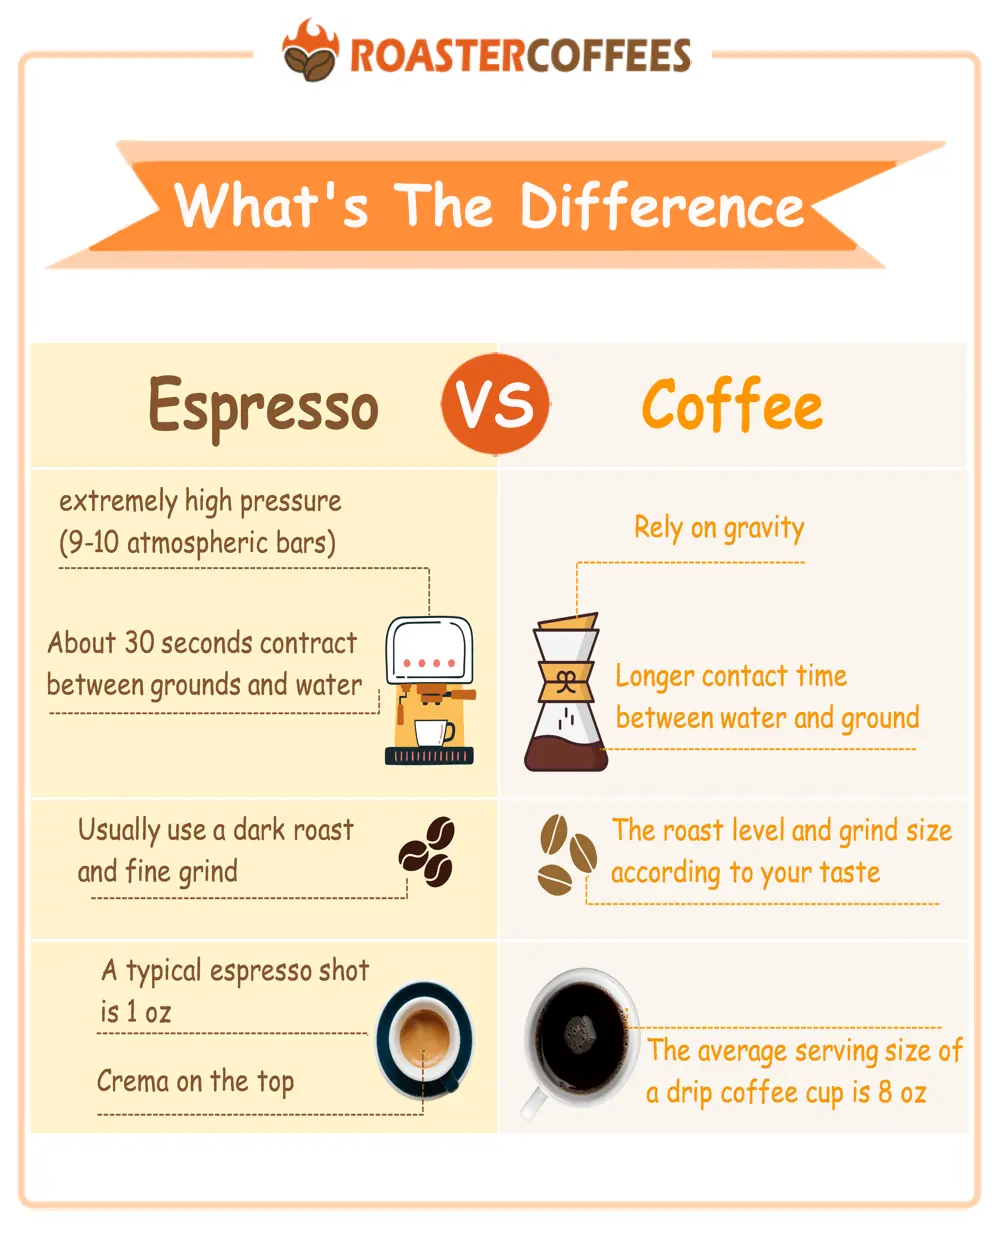 How Is Espresso Different From Regular Coffee?